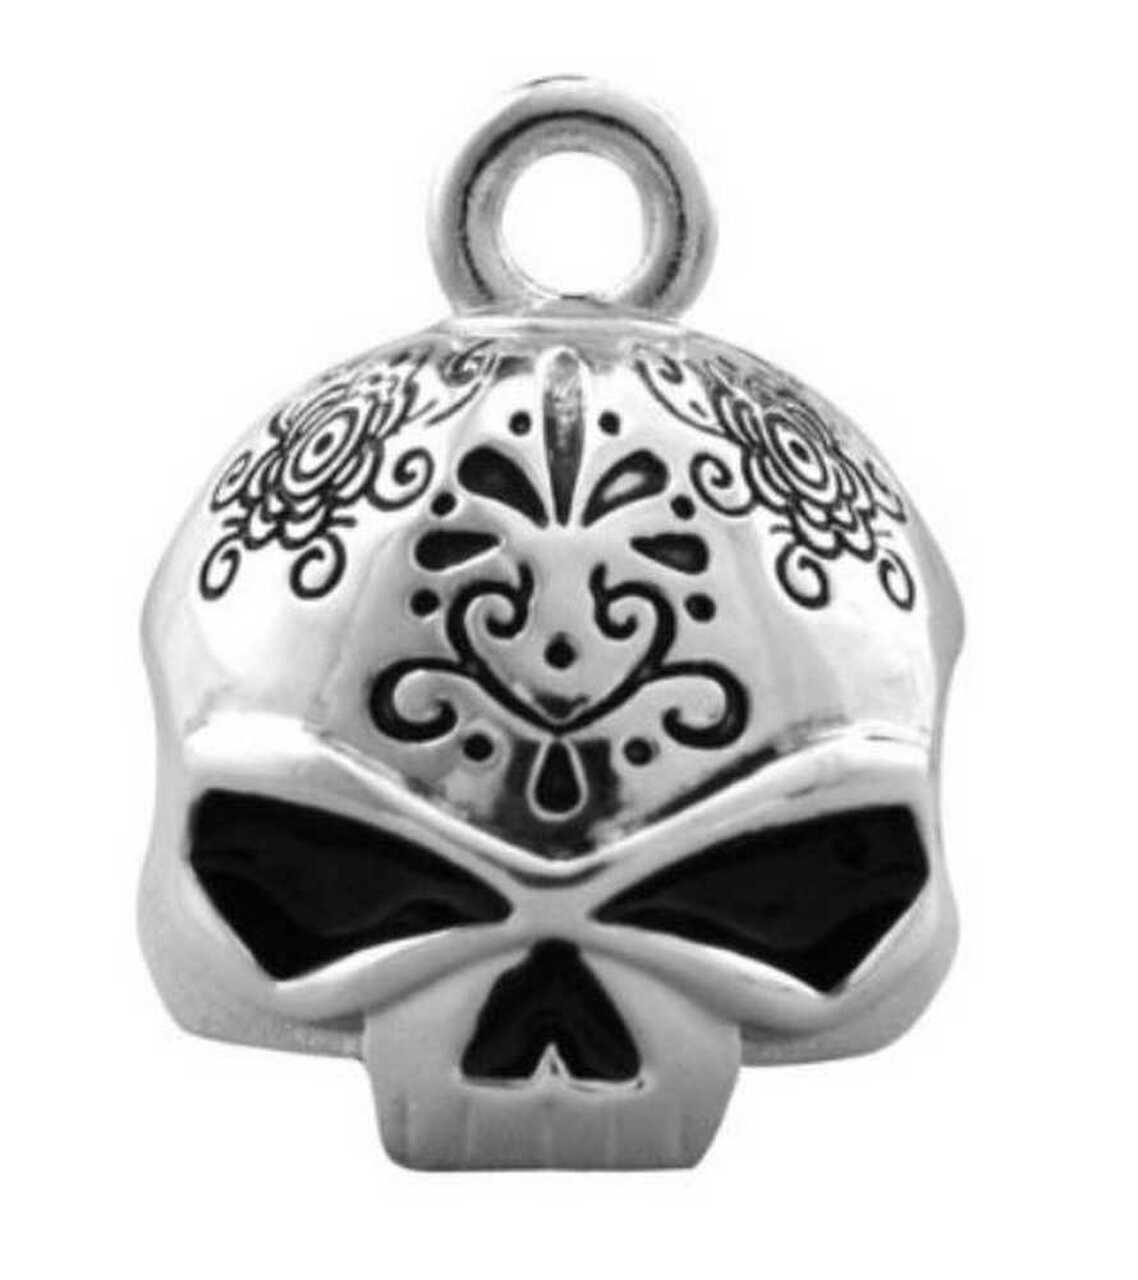 Harley-Davidson® Day Of The Dead Silver Ride Bell